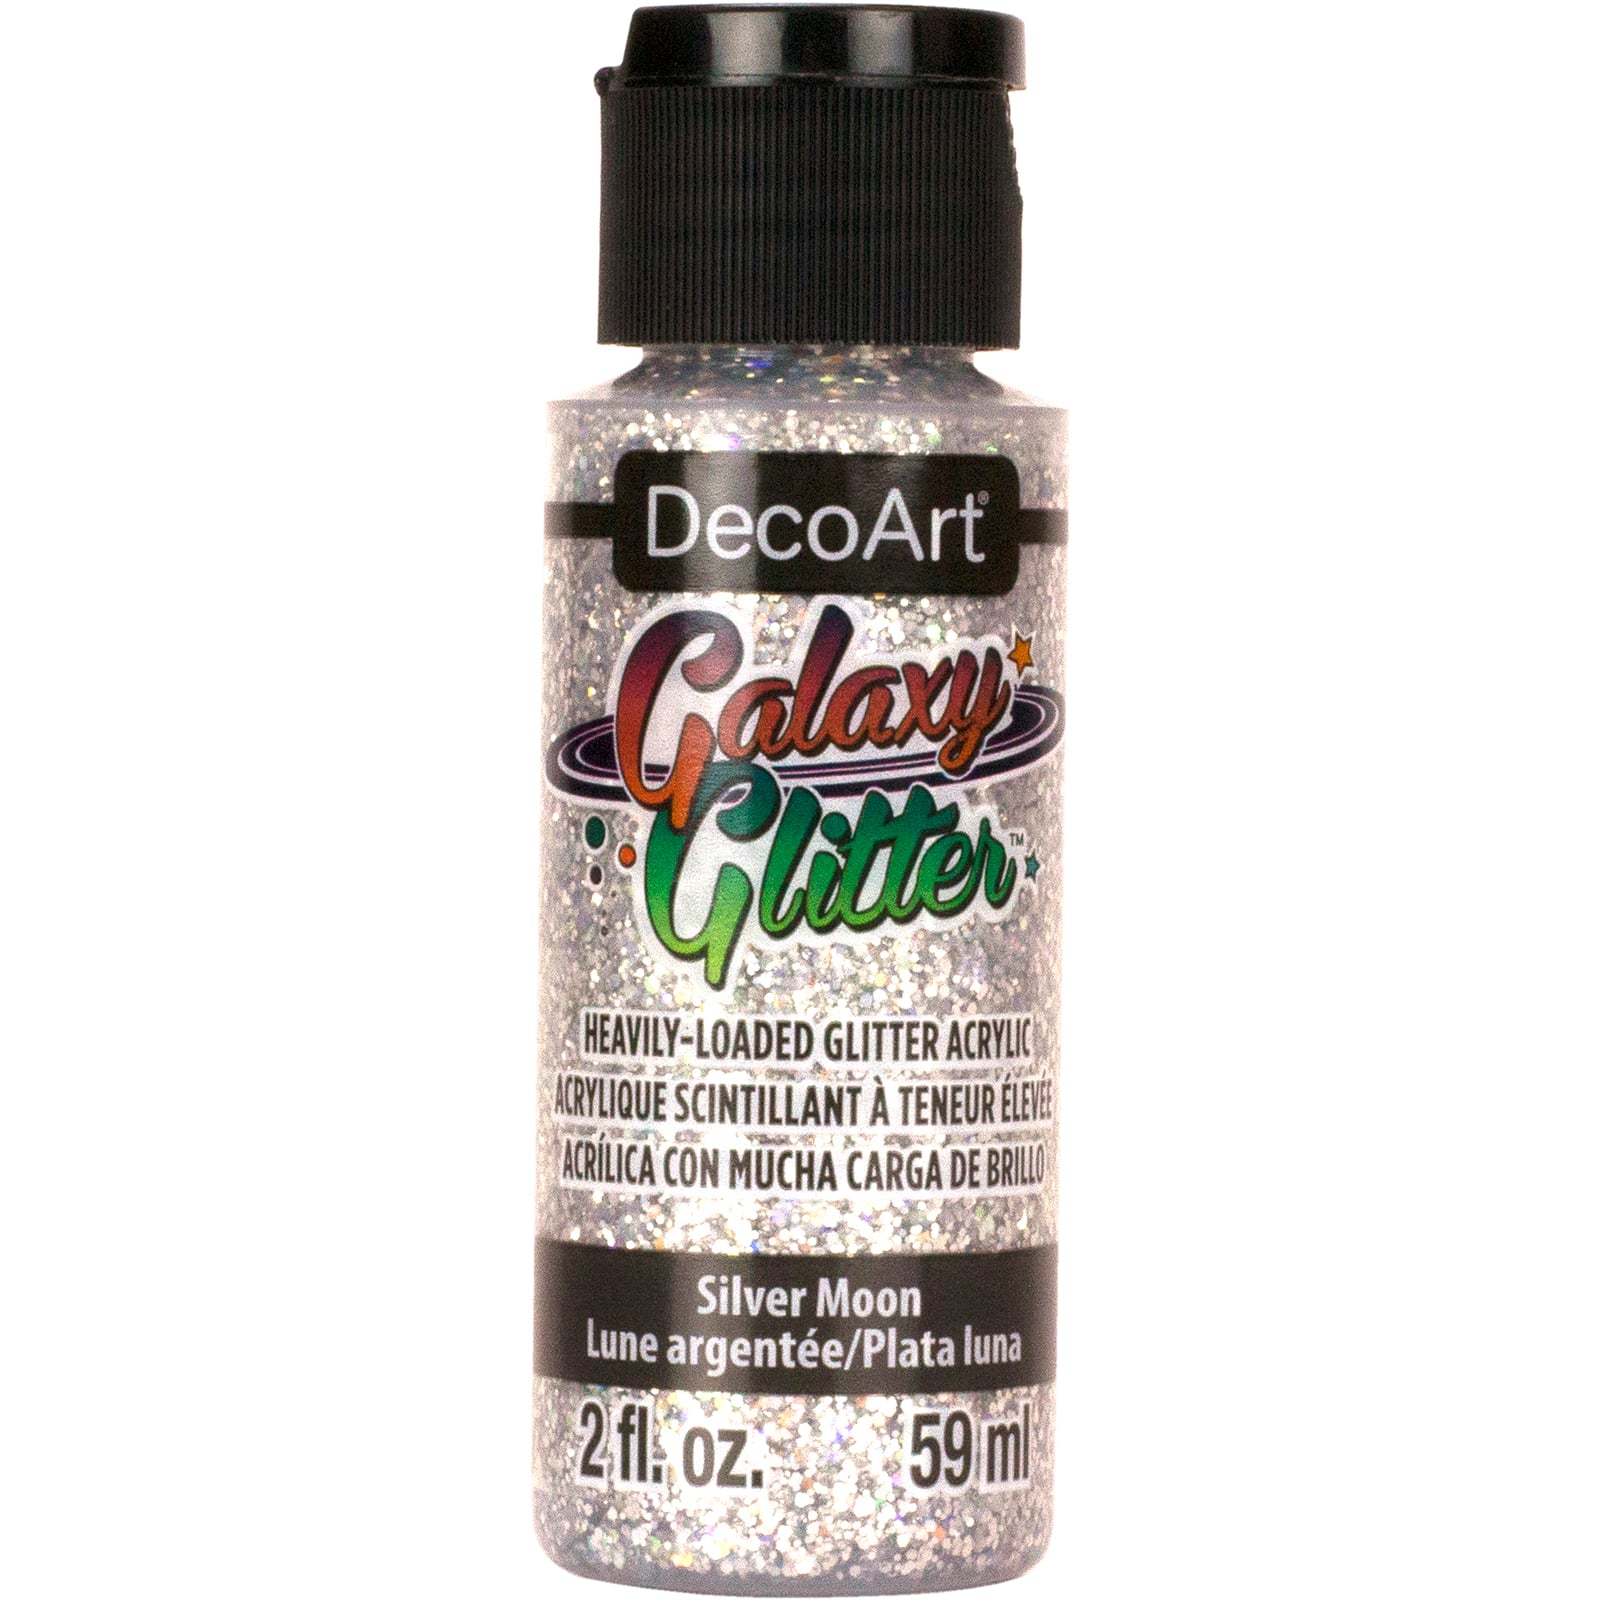 Top Notch 2oz White Glitter Acrylic Craft Paint - Crystal - Craft Paint - Art Supplies & Painting